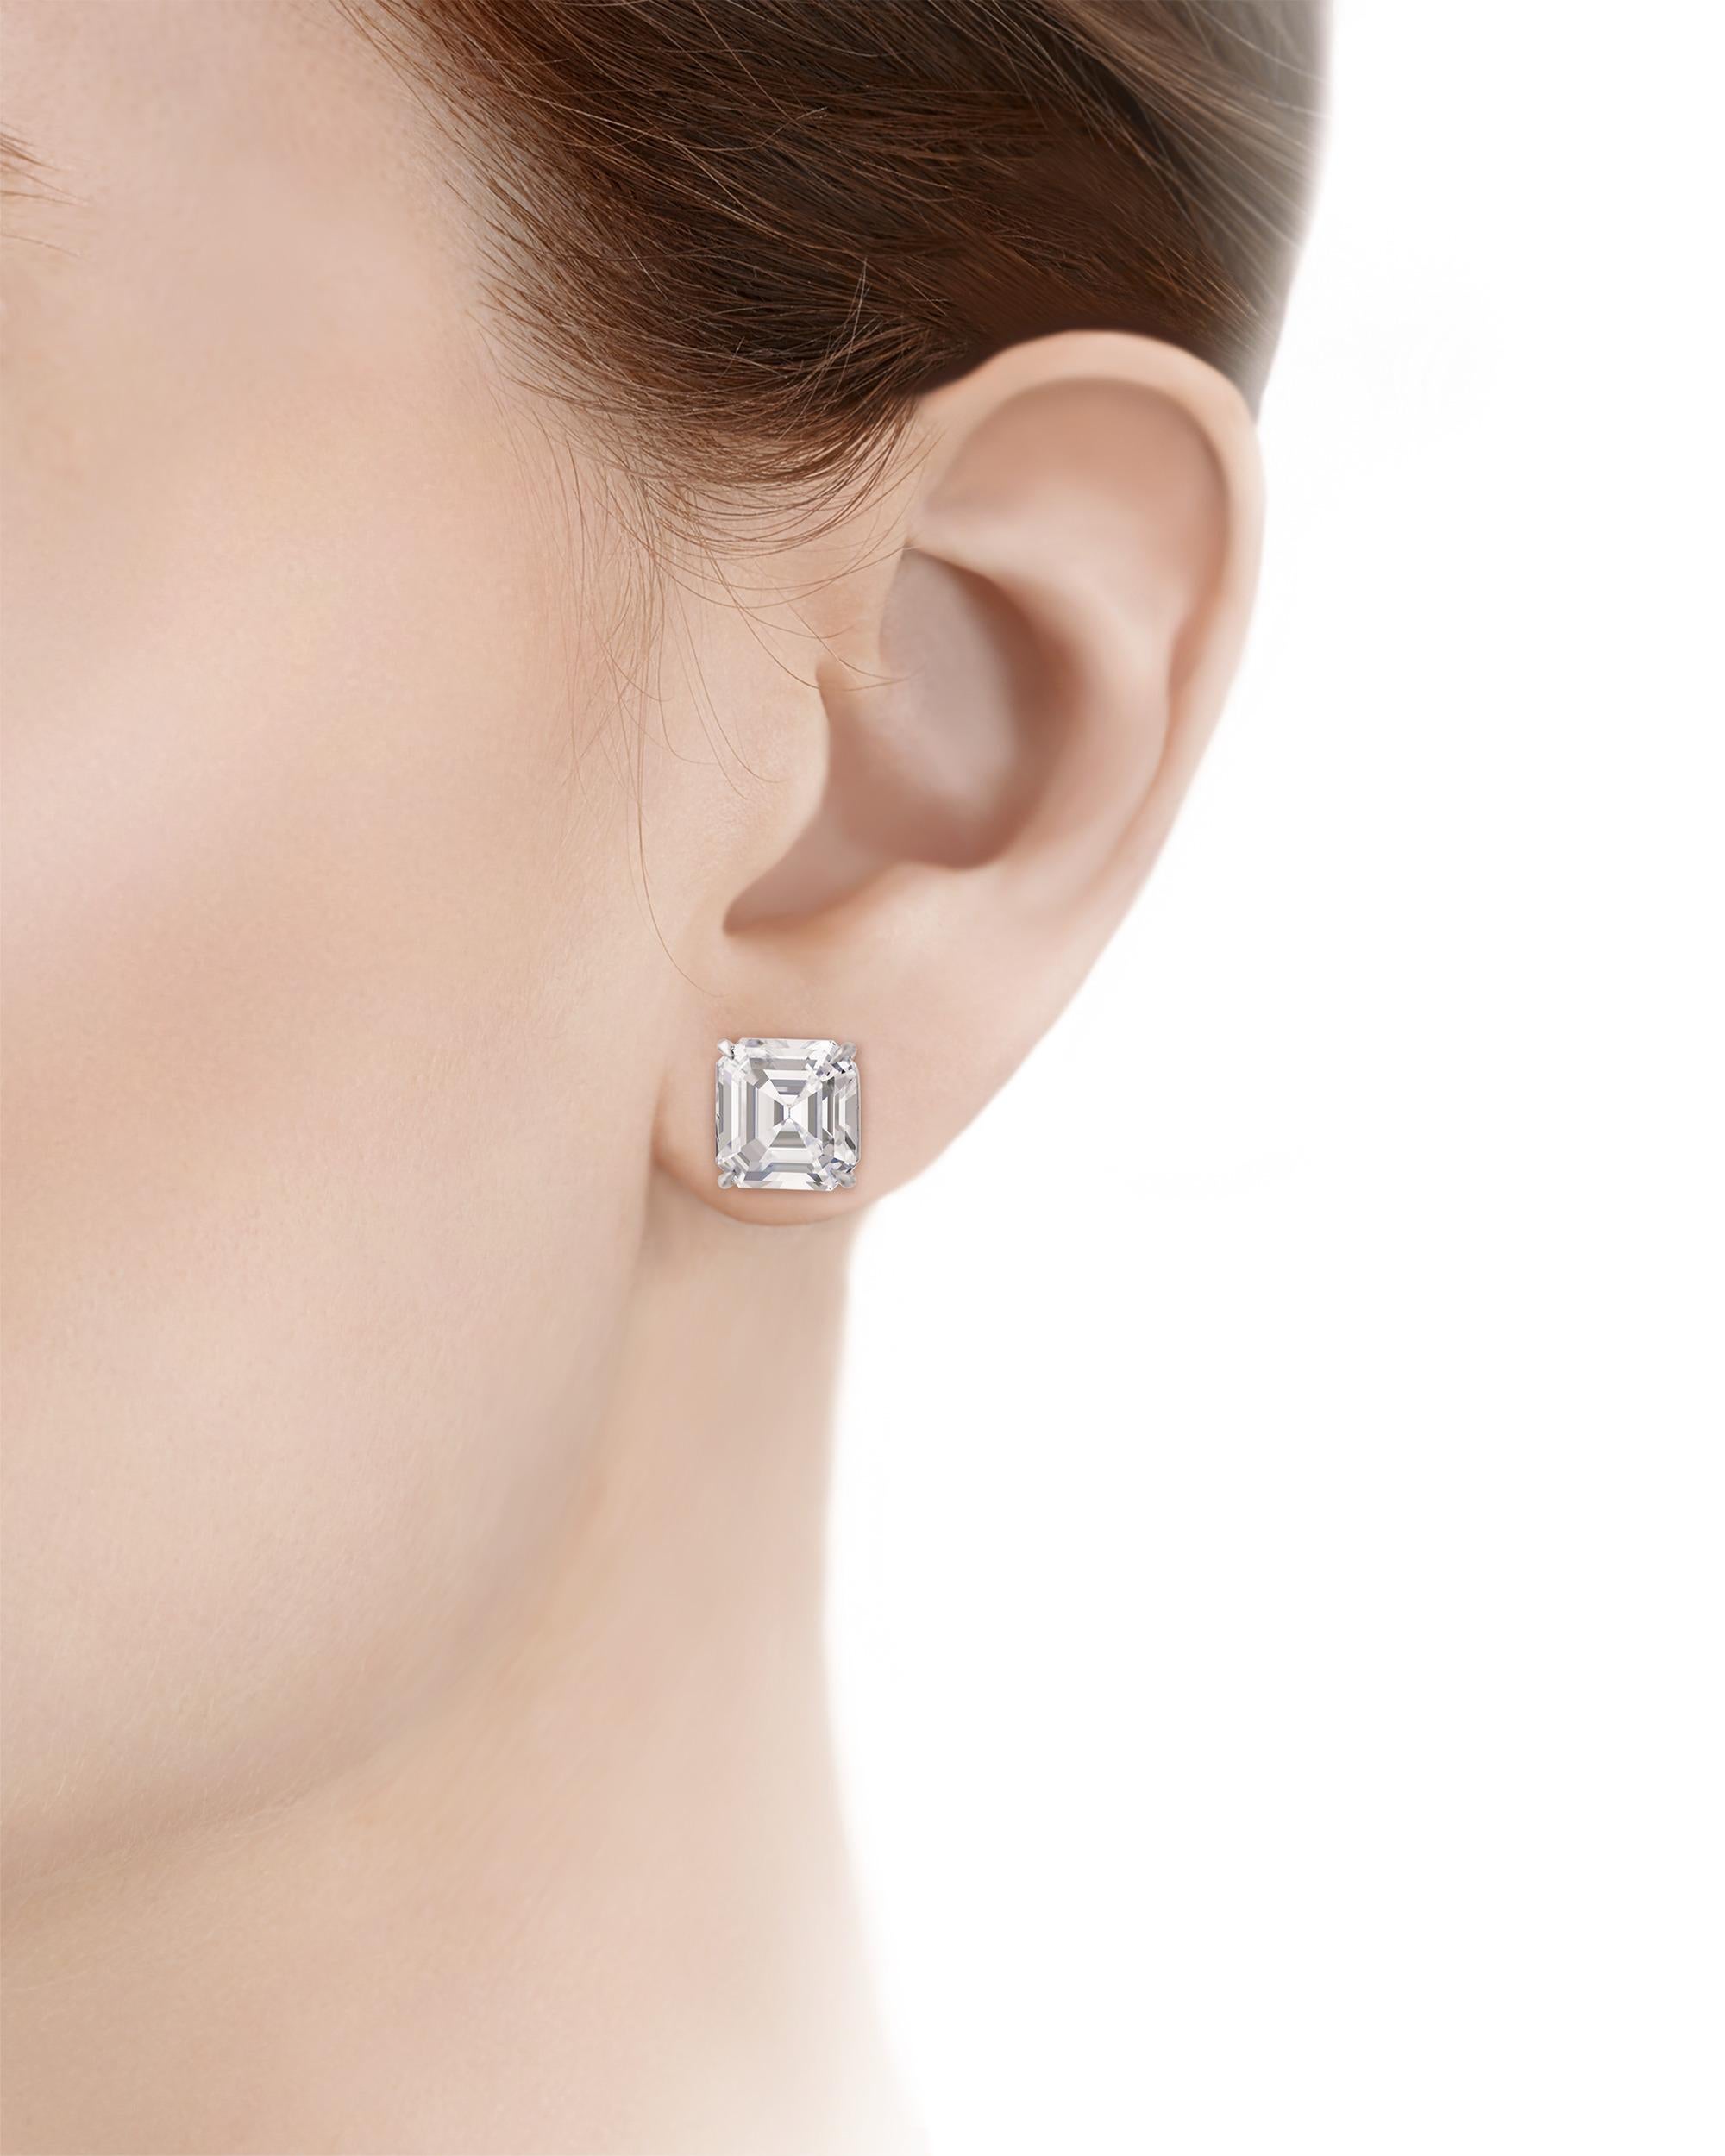 Remarkably reflective and brilliant, these classic diamond studs feature two Asscher-cut diamonds weighing a combined 14.42 carats. Each gem is certified by the Gemological Institute of America as displaying G color and VS1-VVS1 clarity.